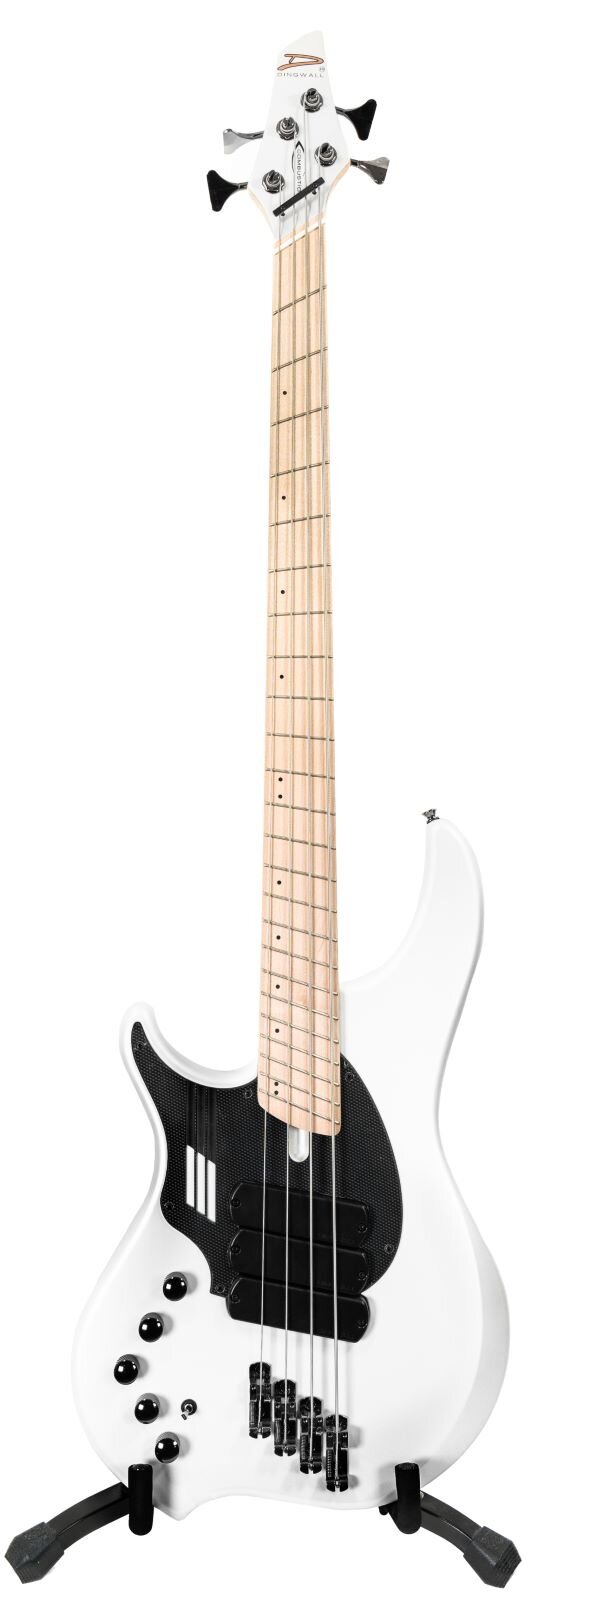 Dingwall NG3 Nolly Signature 4 strings, Left Hand, Ducati Pearl White, maple fingerboard, 3 pickups : photo 1